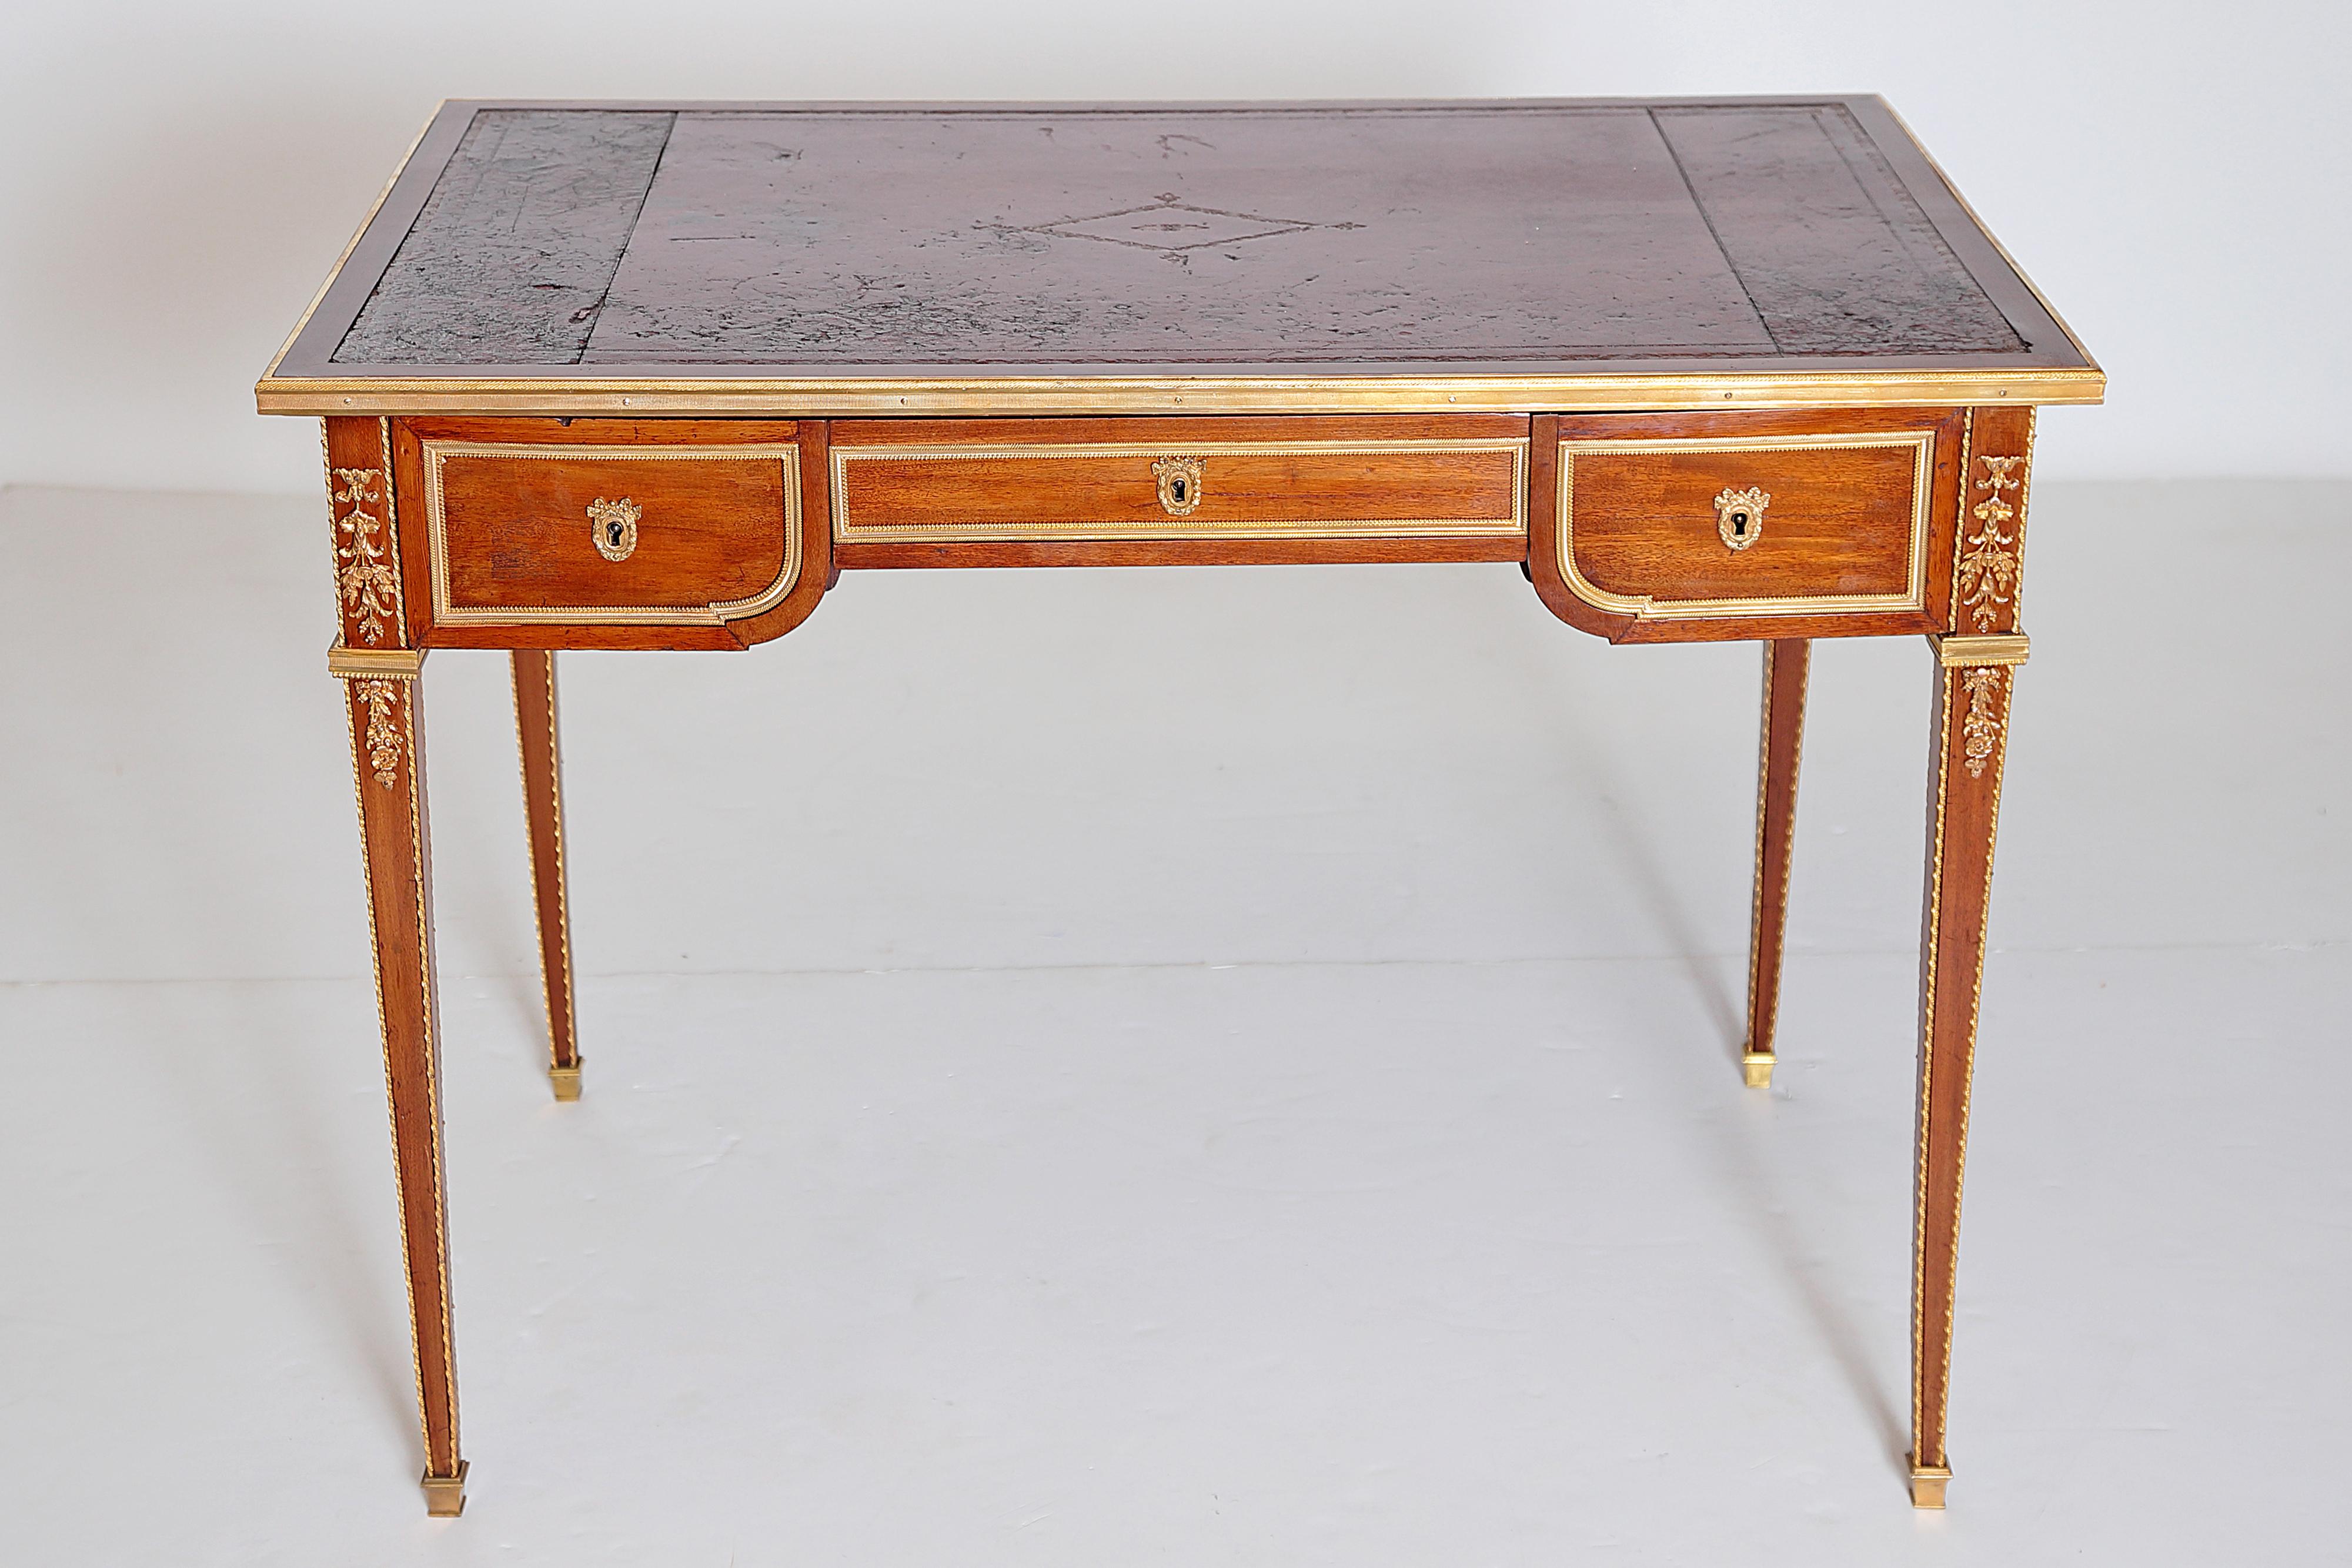 Late 19th Century Louis XVI Style Writing Table with Red Leather Writing Surface